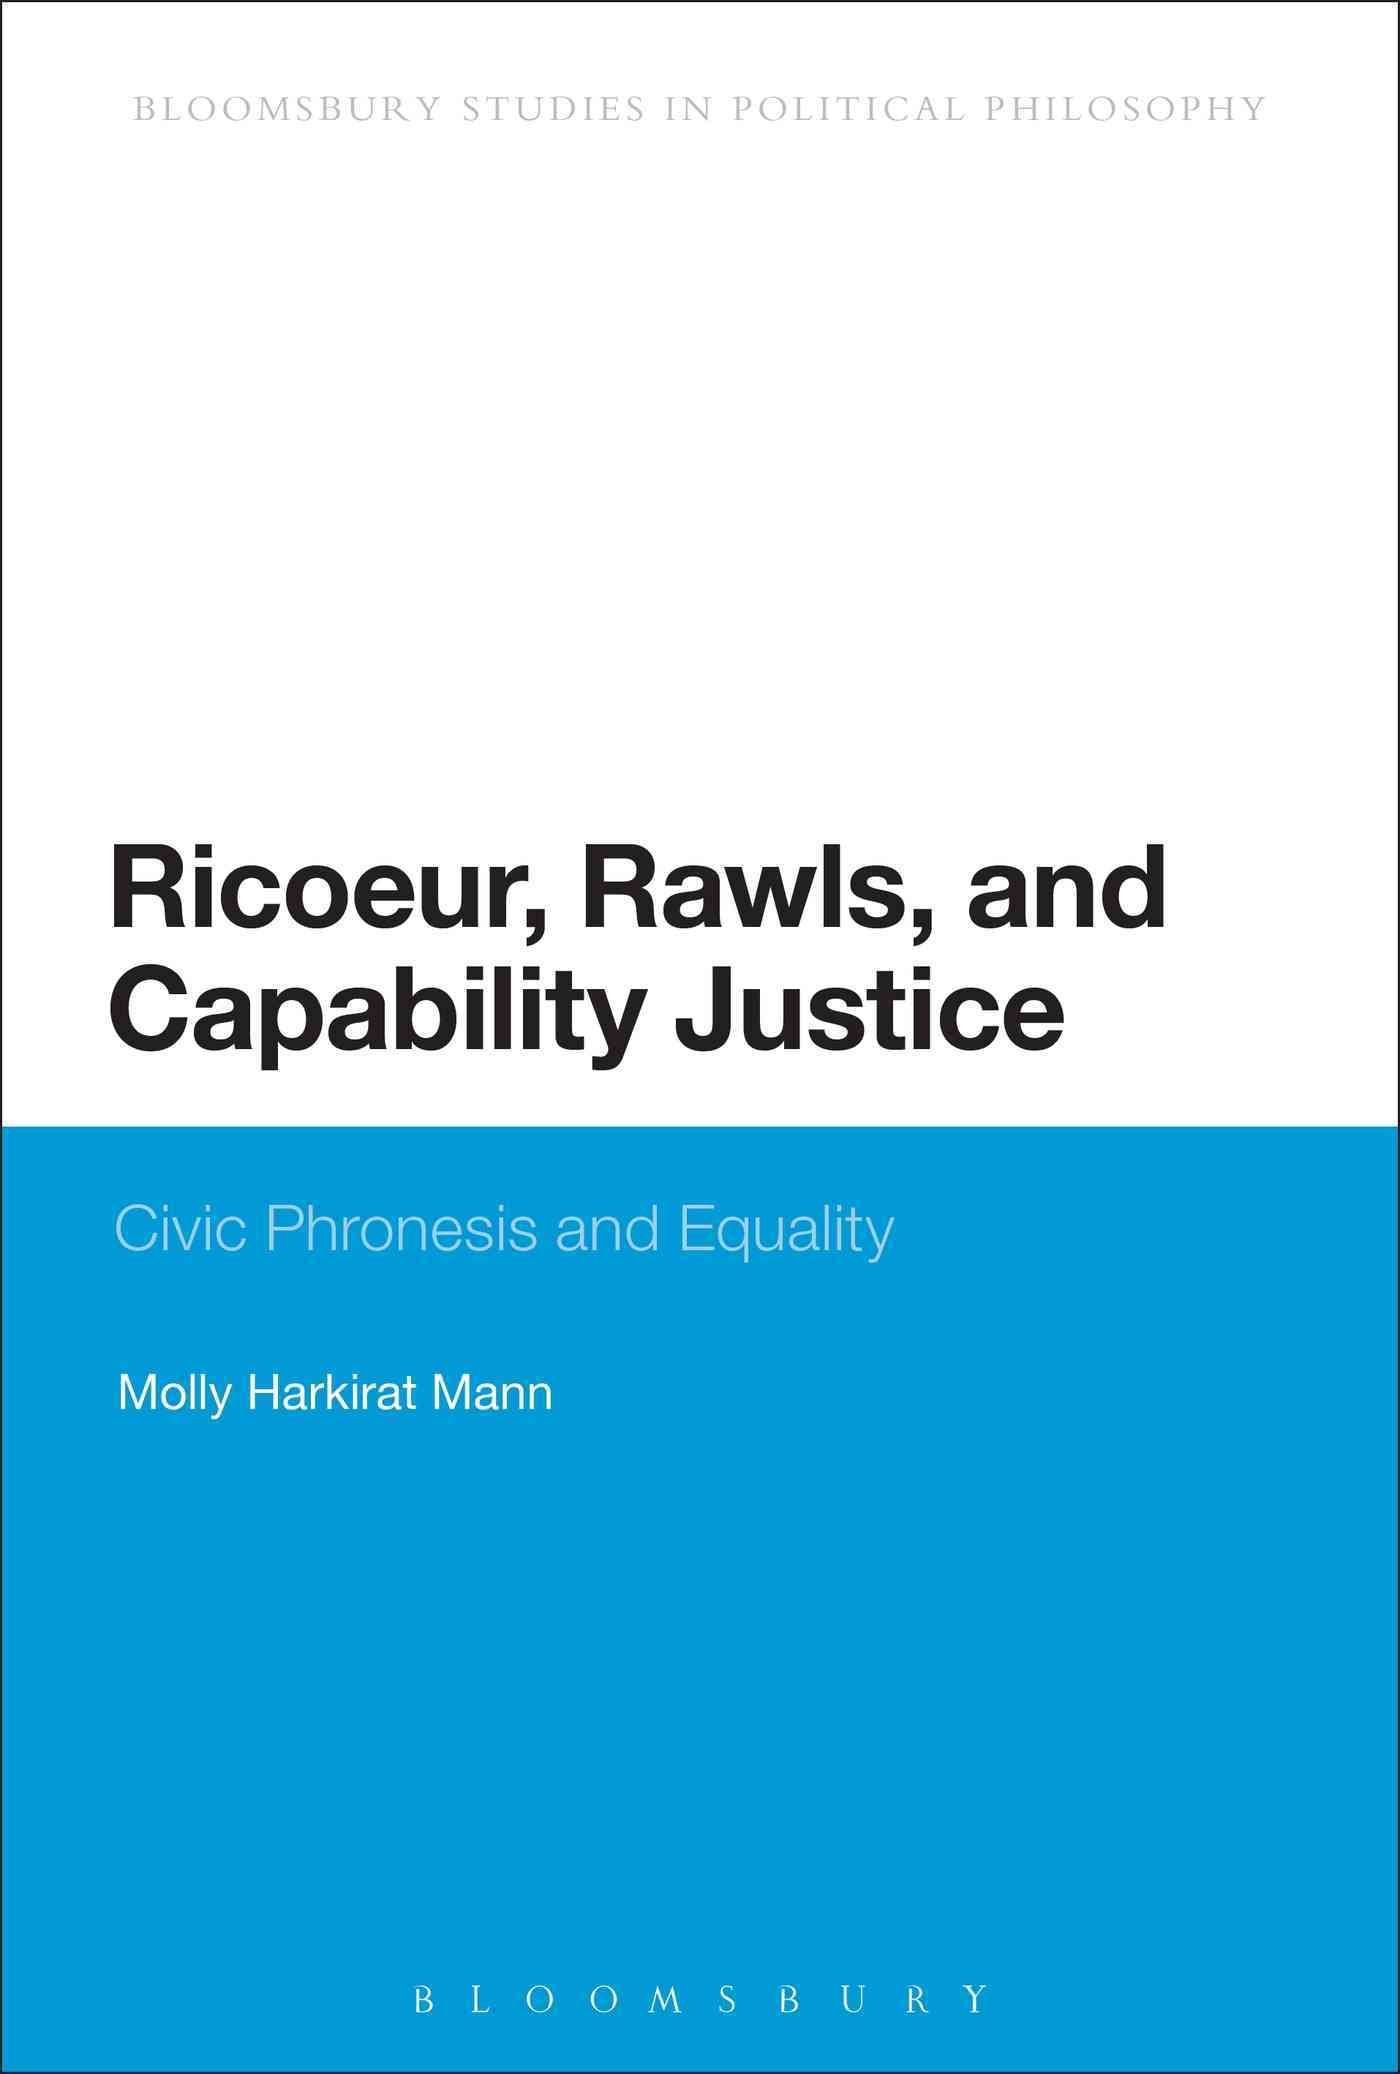 Ricoeur, Rawls, and Capability Justice